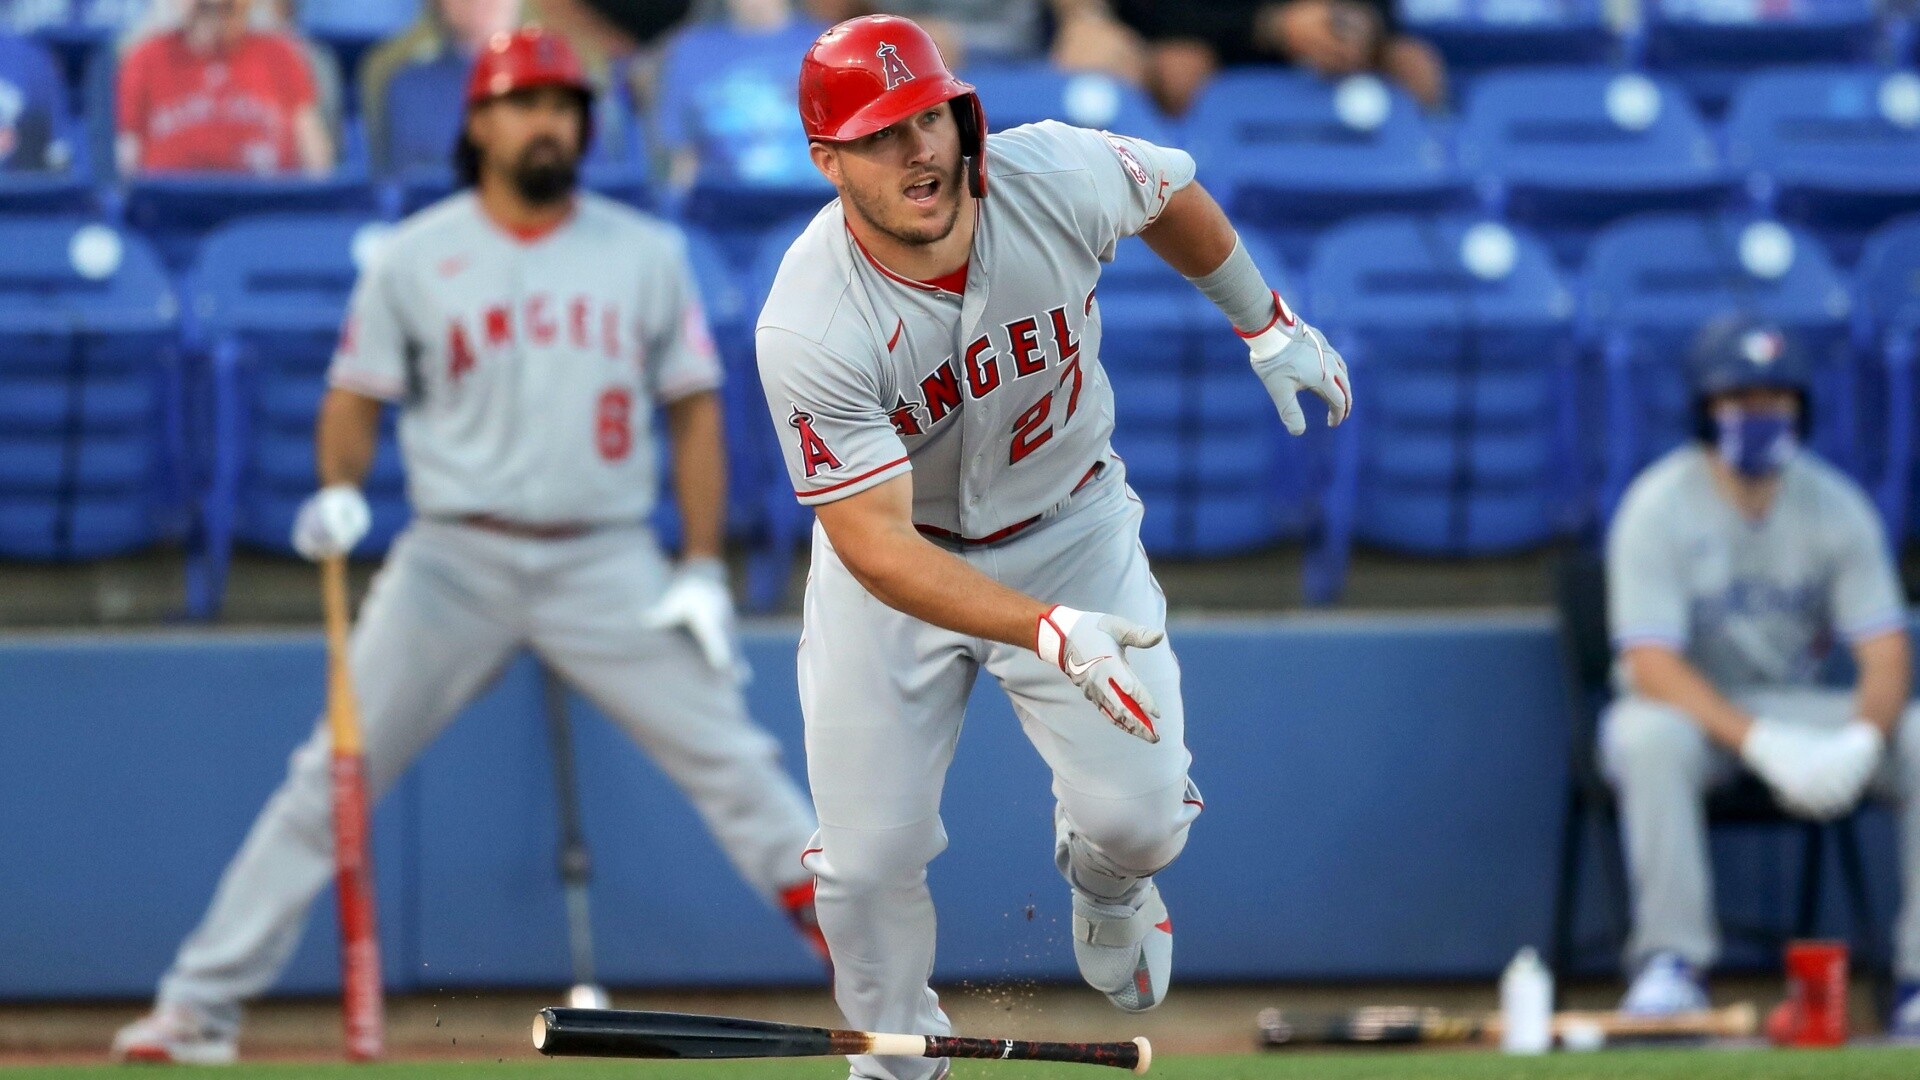 Mike Trout: Two-time American League MVP, Baseball player. 1920x1080 Full HD Background.